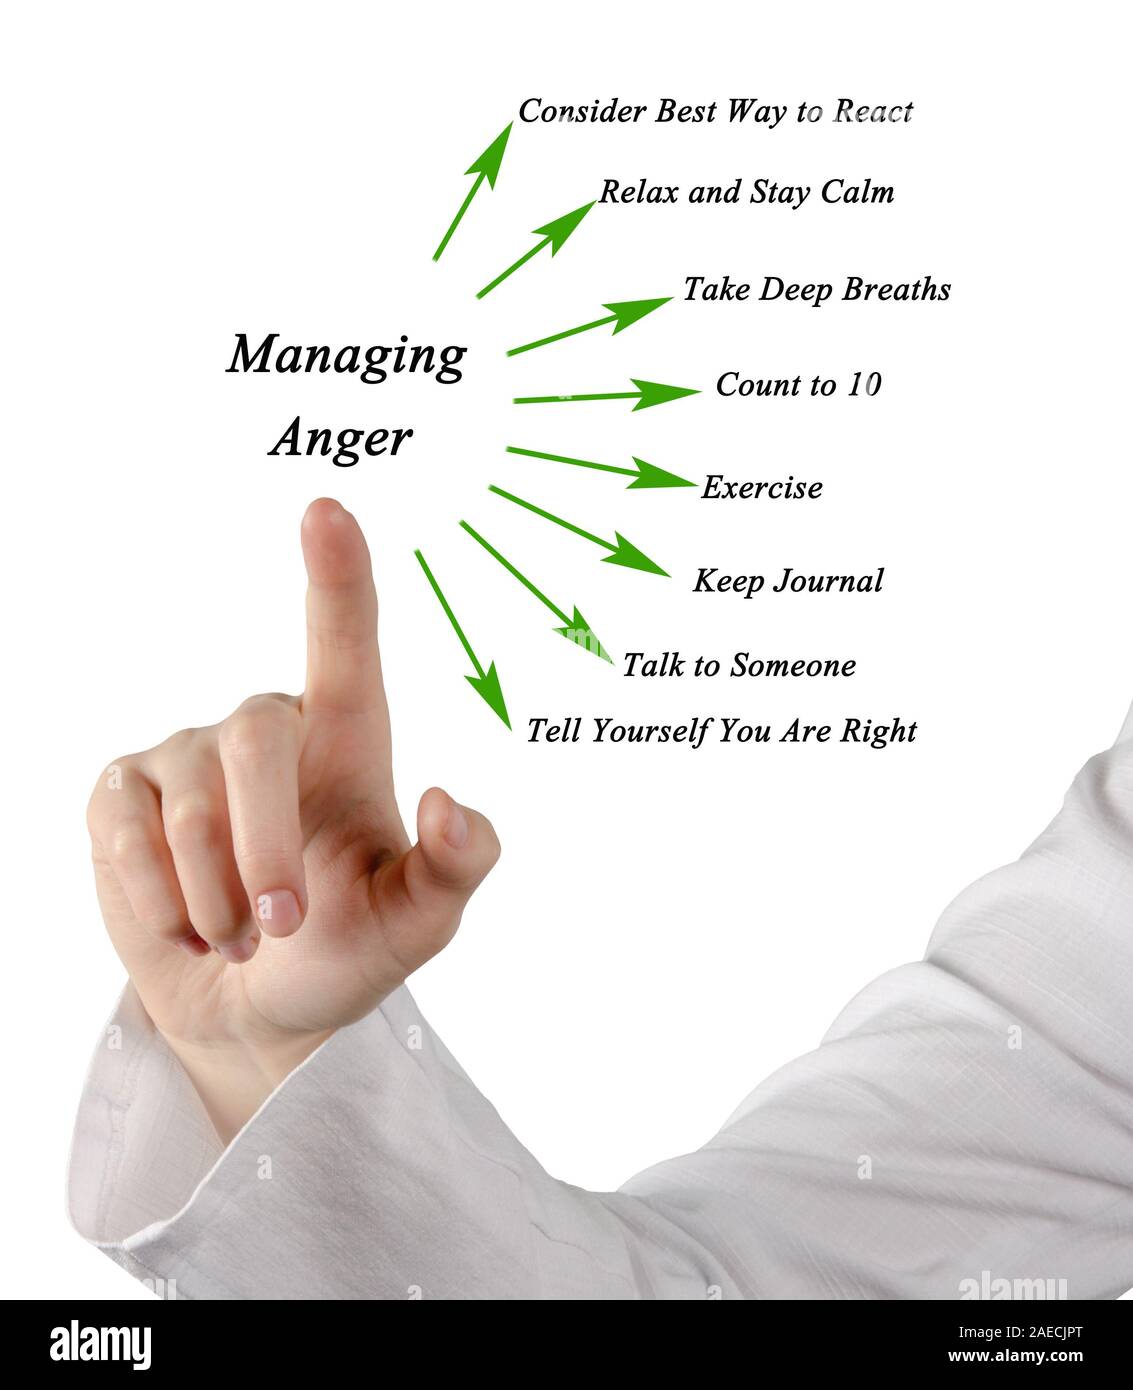 Anger Management Classes In Apple Valley, Ca